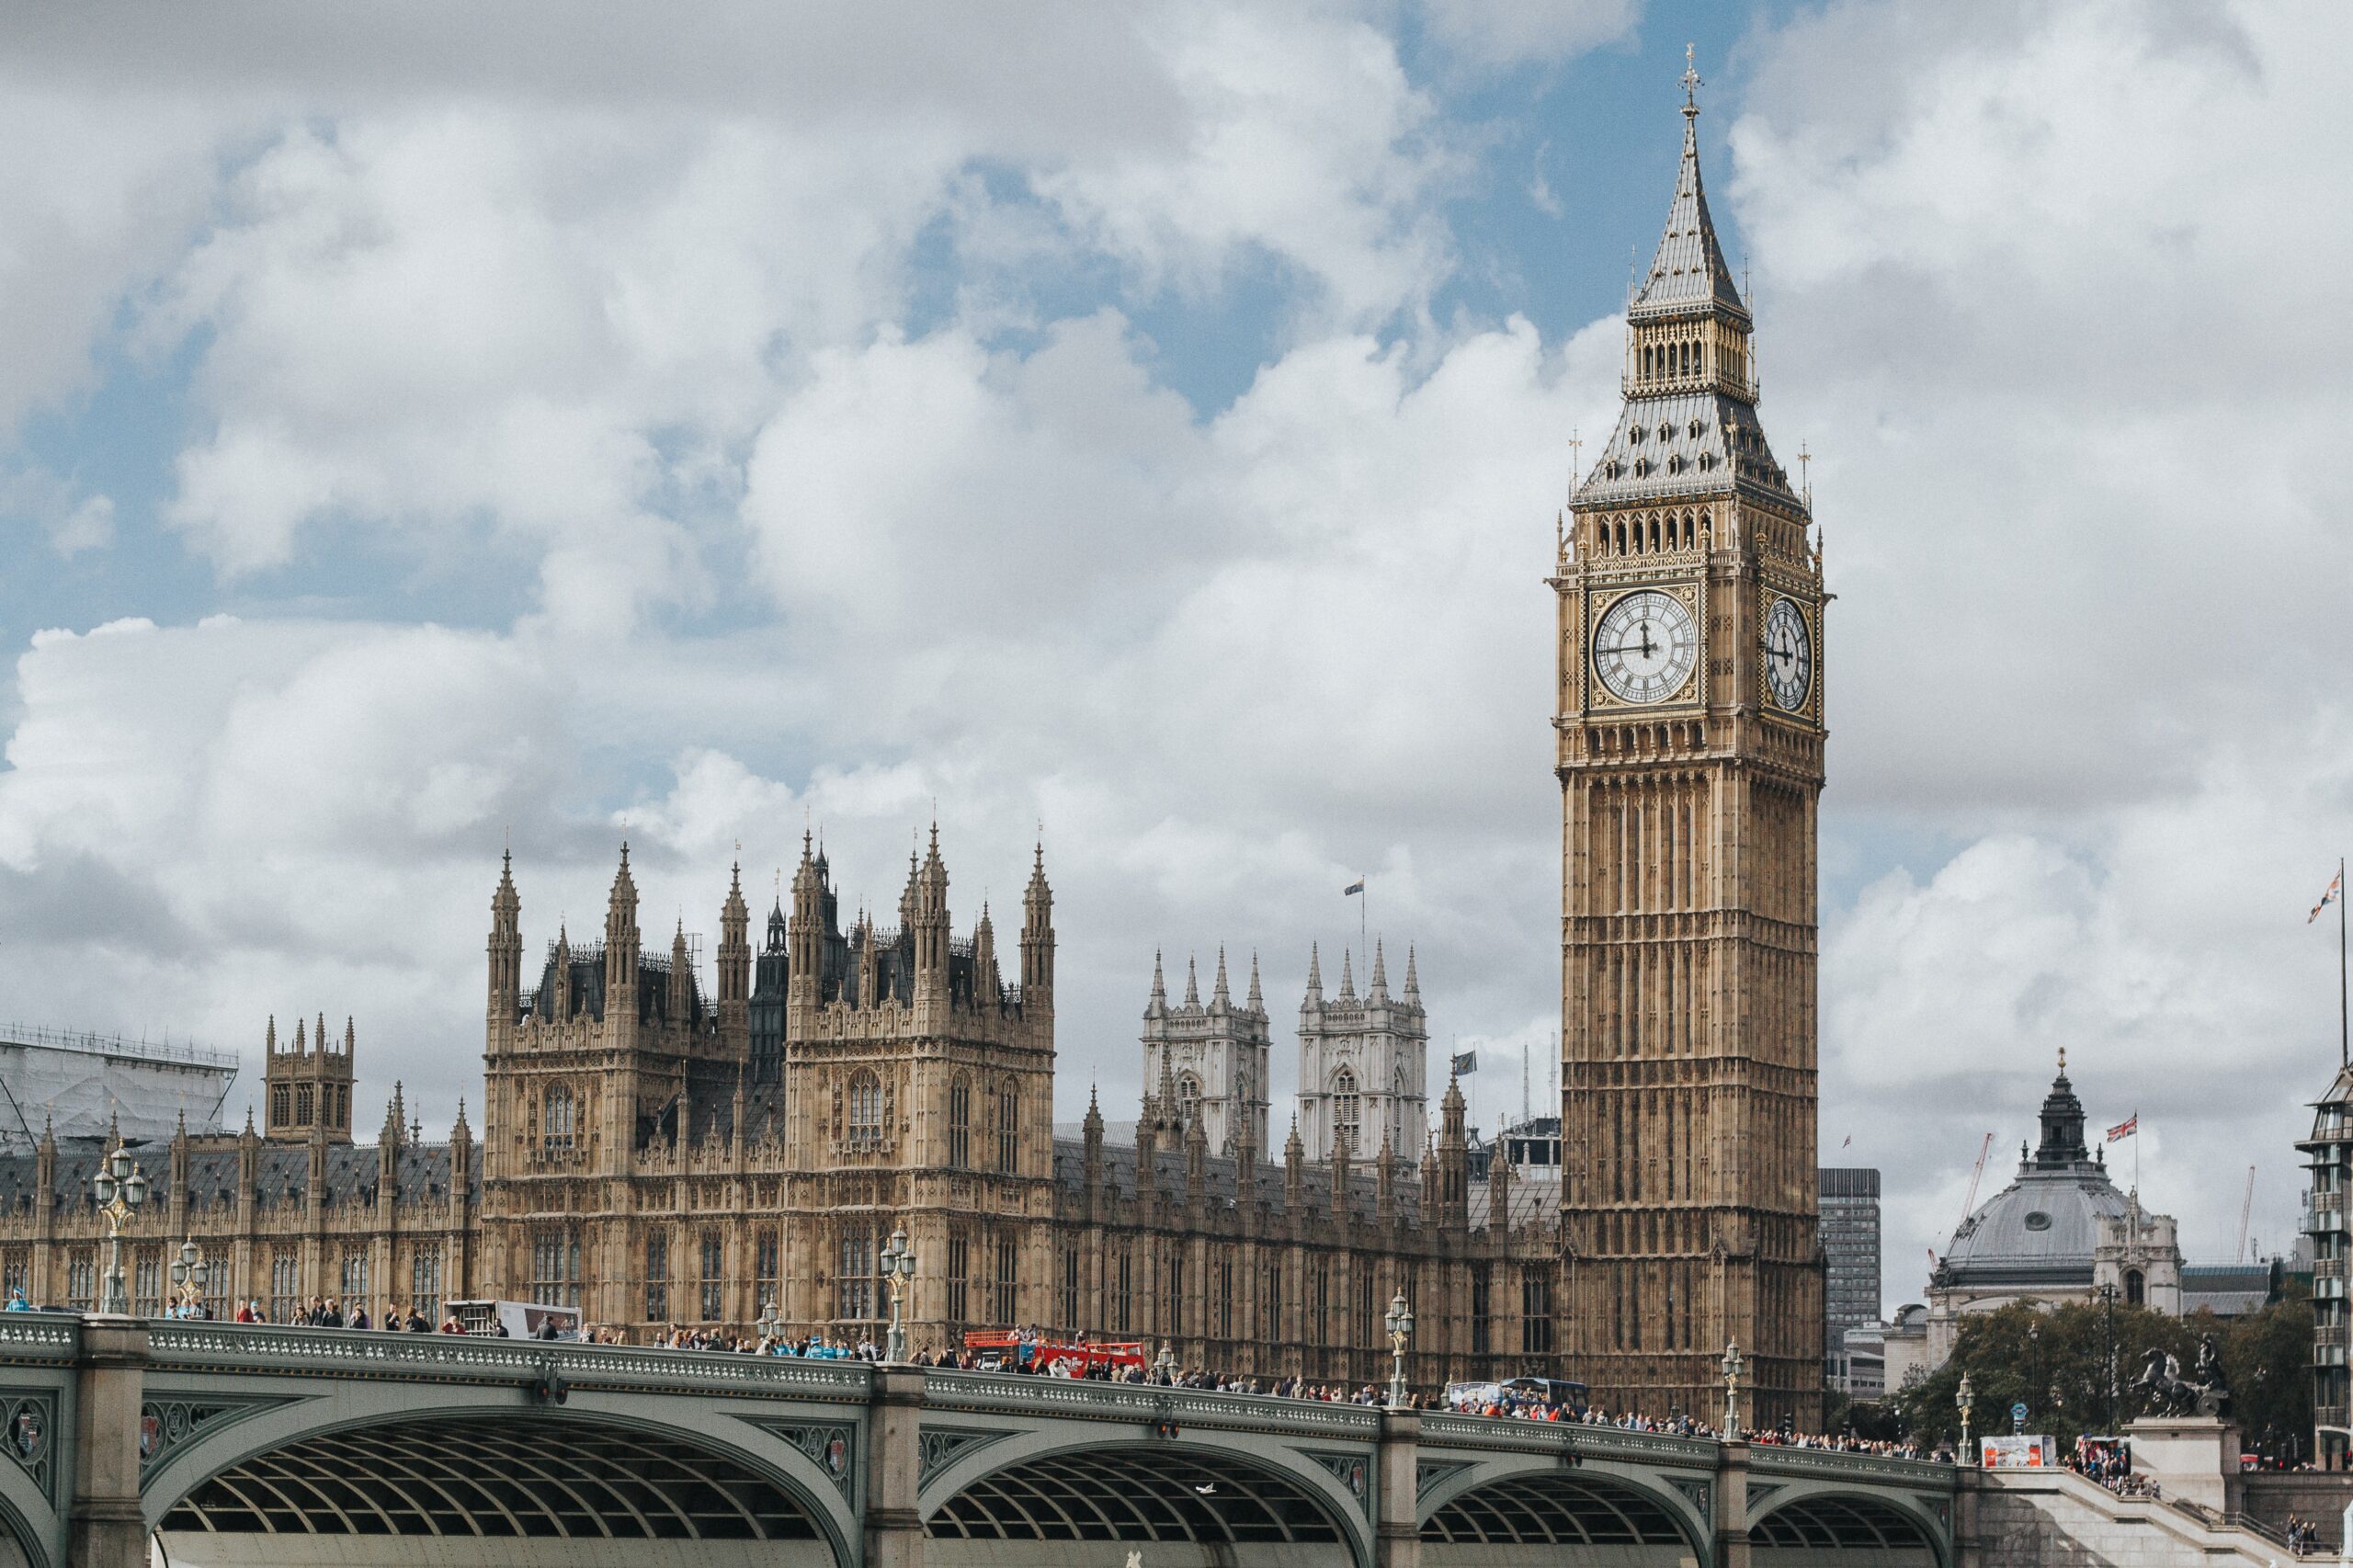 Big Ben is a significant English symbol that is located in central London. Checkout the intricate tower that travelers should not miss.
pictured: Big Ben tower on a cloudy English day 